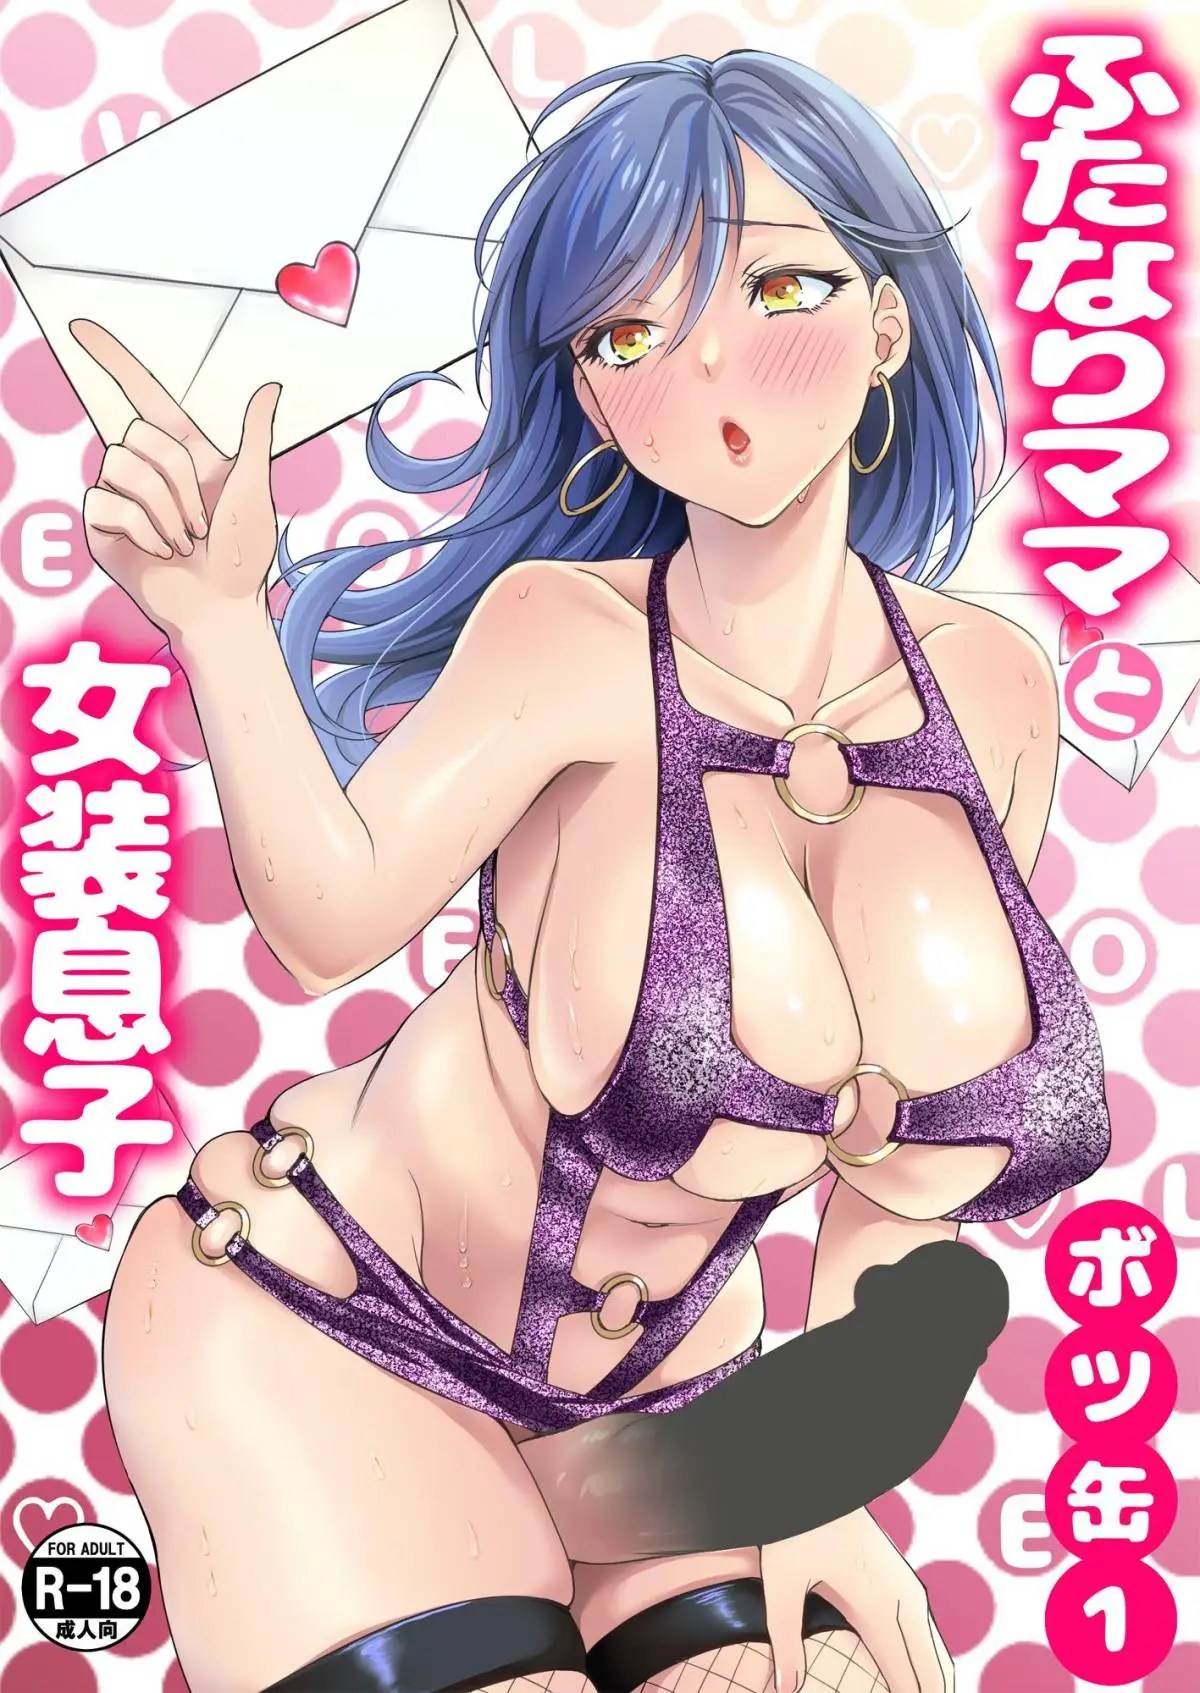 anne mistery recommends futa on male hentai manga pic